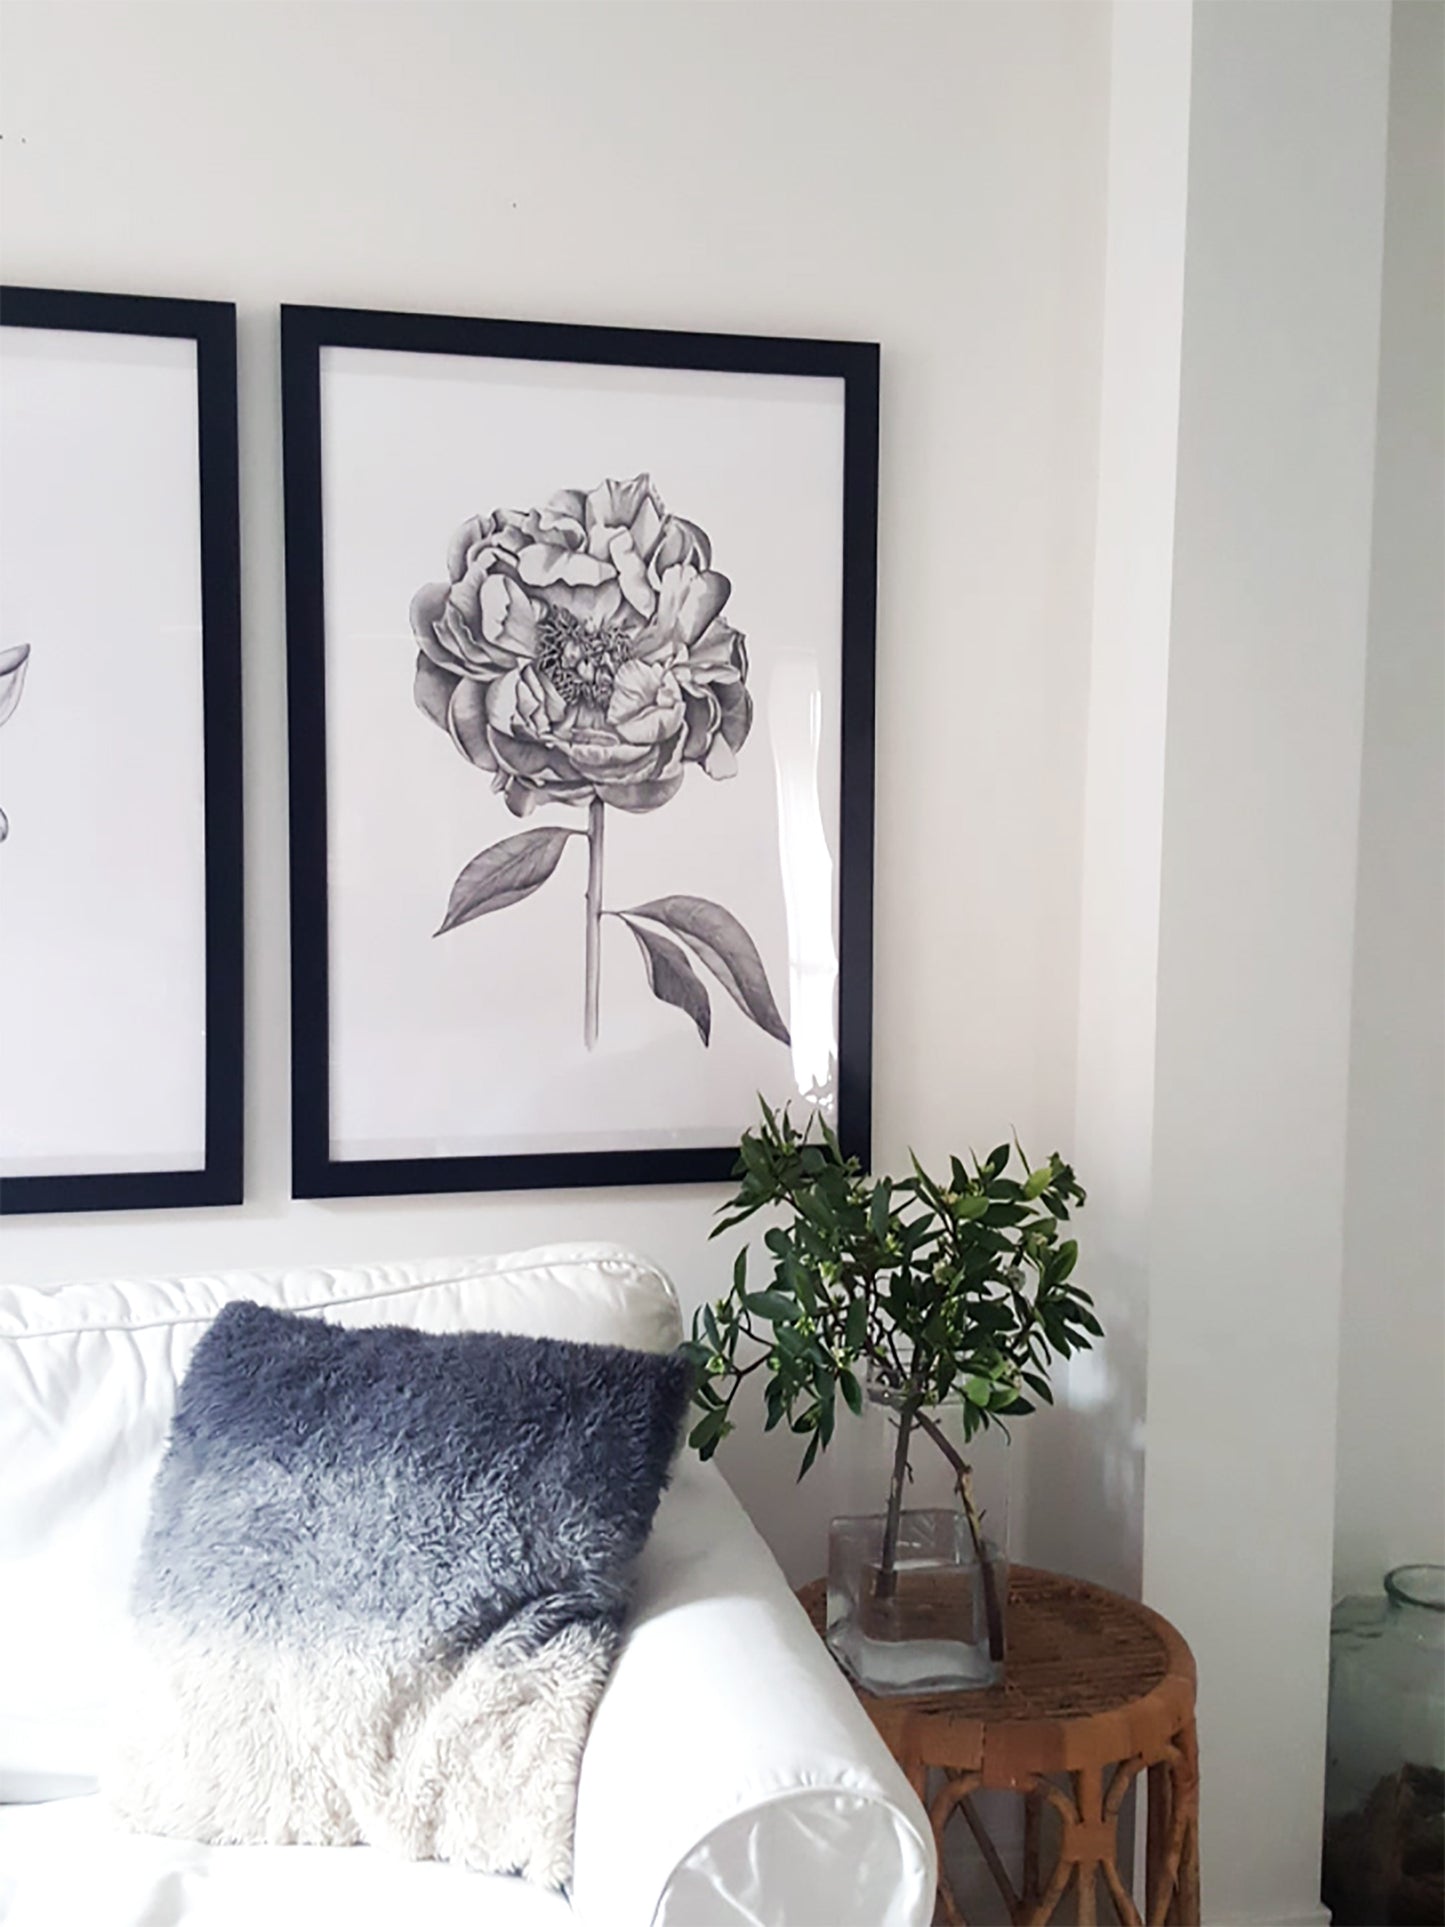 Peony illustration, buy on it's own or as a set of 3 with the Magnolia and Protea print.